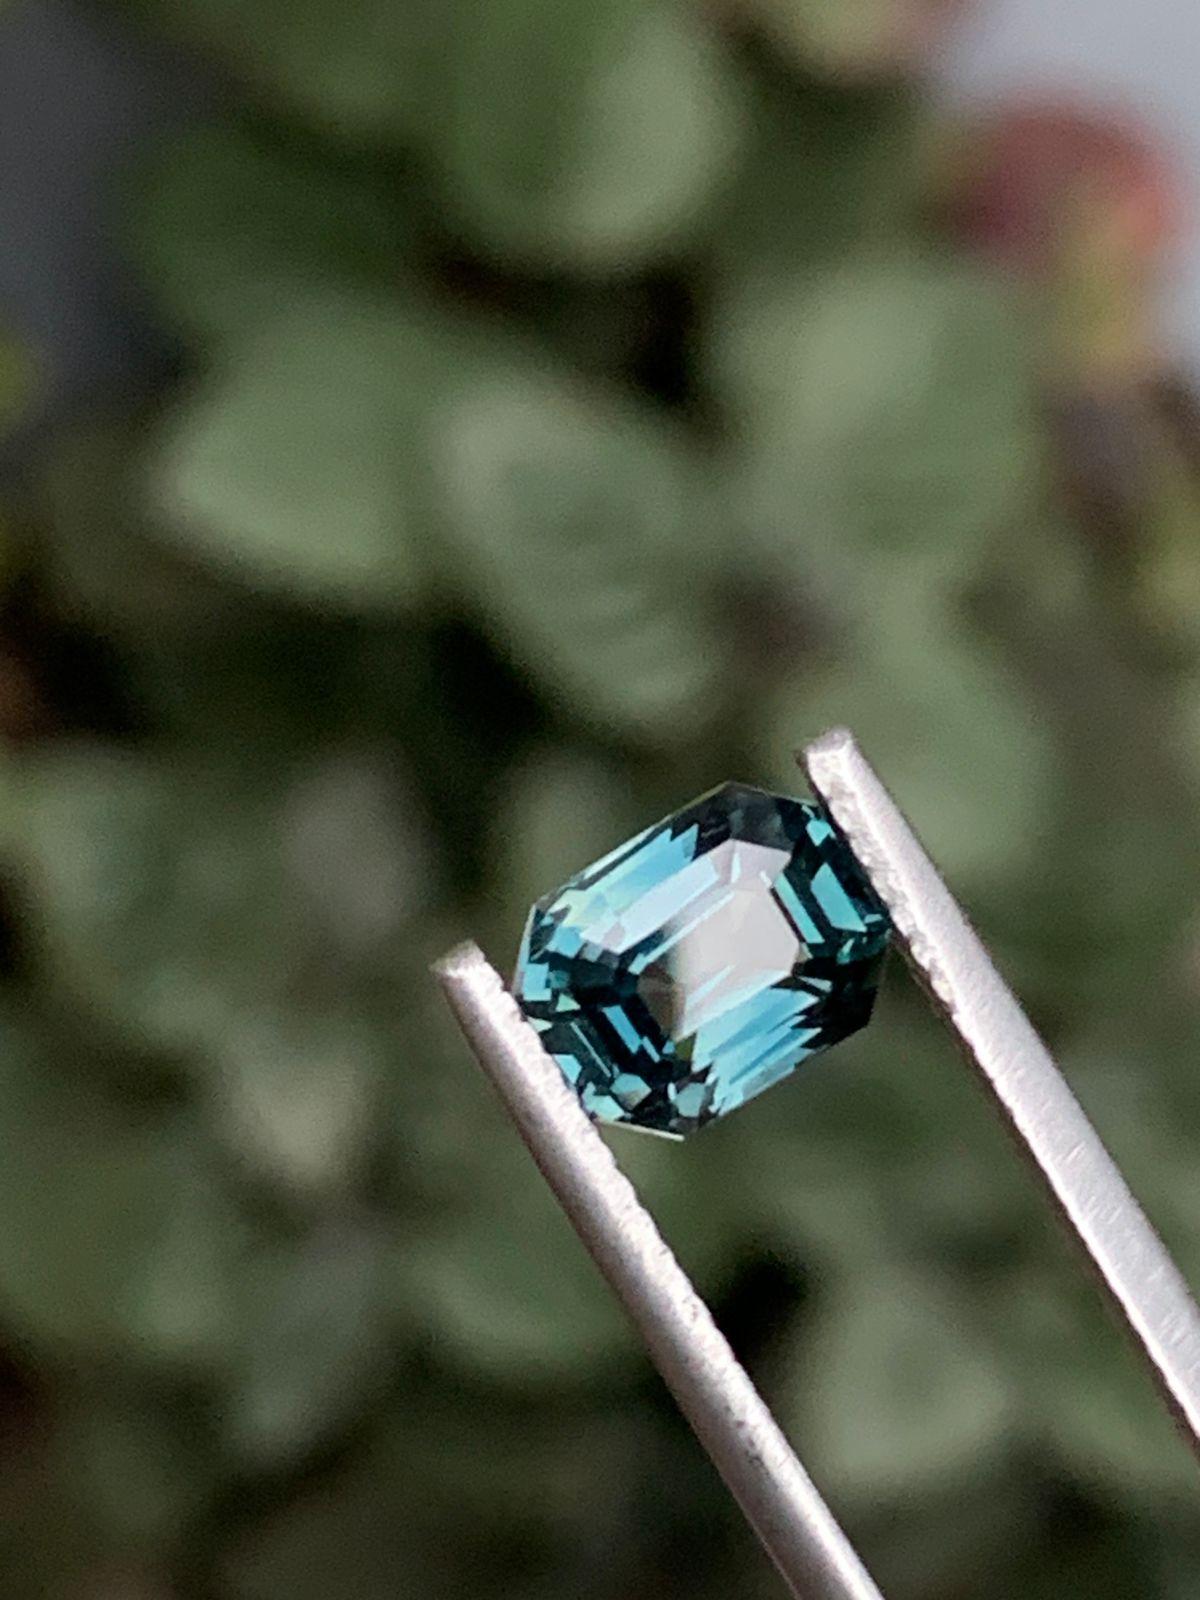 Sapphire 
Fancy Color 
No heating 
Natural 
Vivid color 
Octagonal step cut 
Transparent 
Perfect for ring 
Beautiful Teal / Green color 
Comes with a certificate
Comes with an an appraisal 
